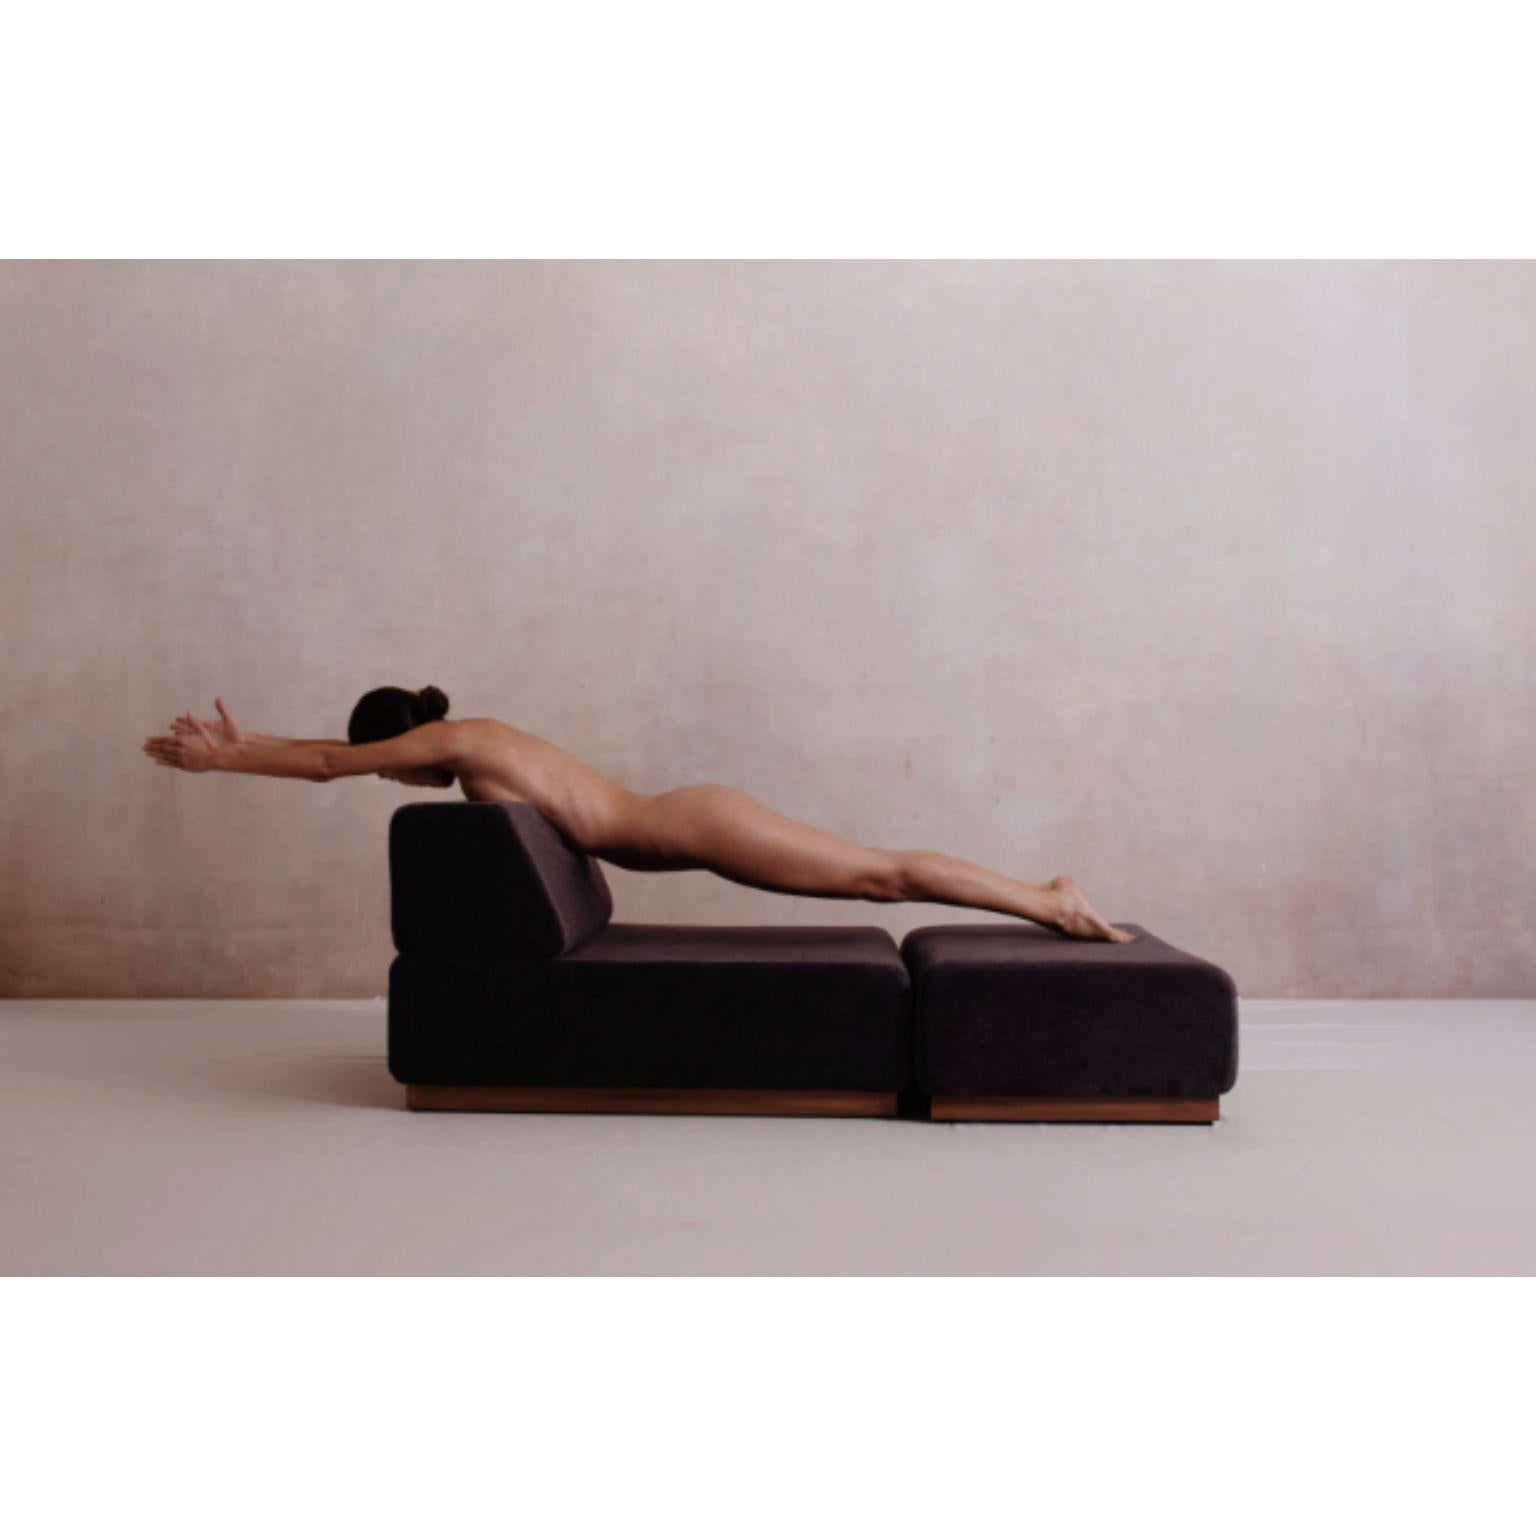 Post-Modern White Nube Lounger with Ottoman by Siete Studio For Sale